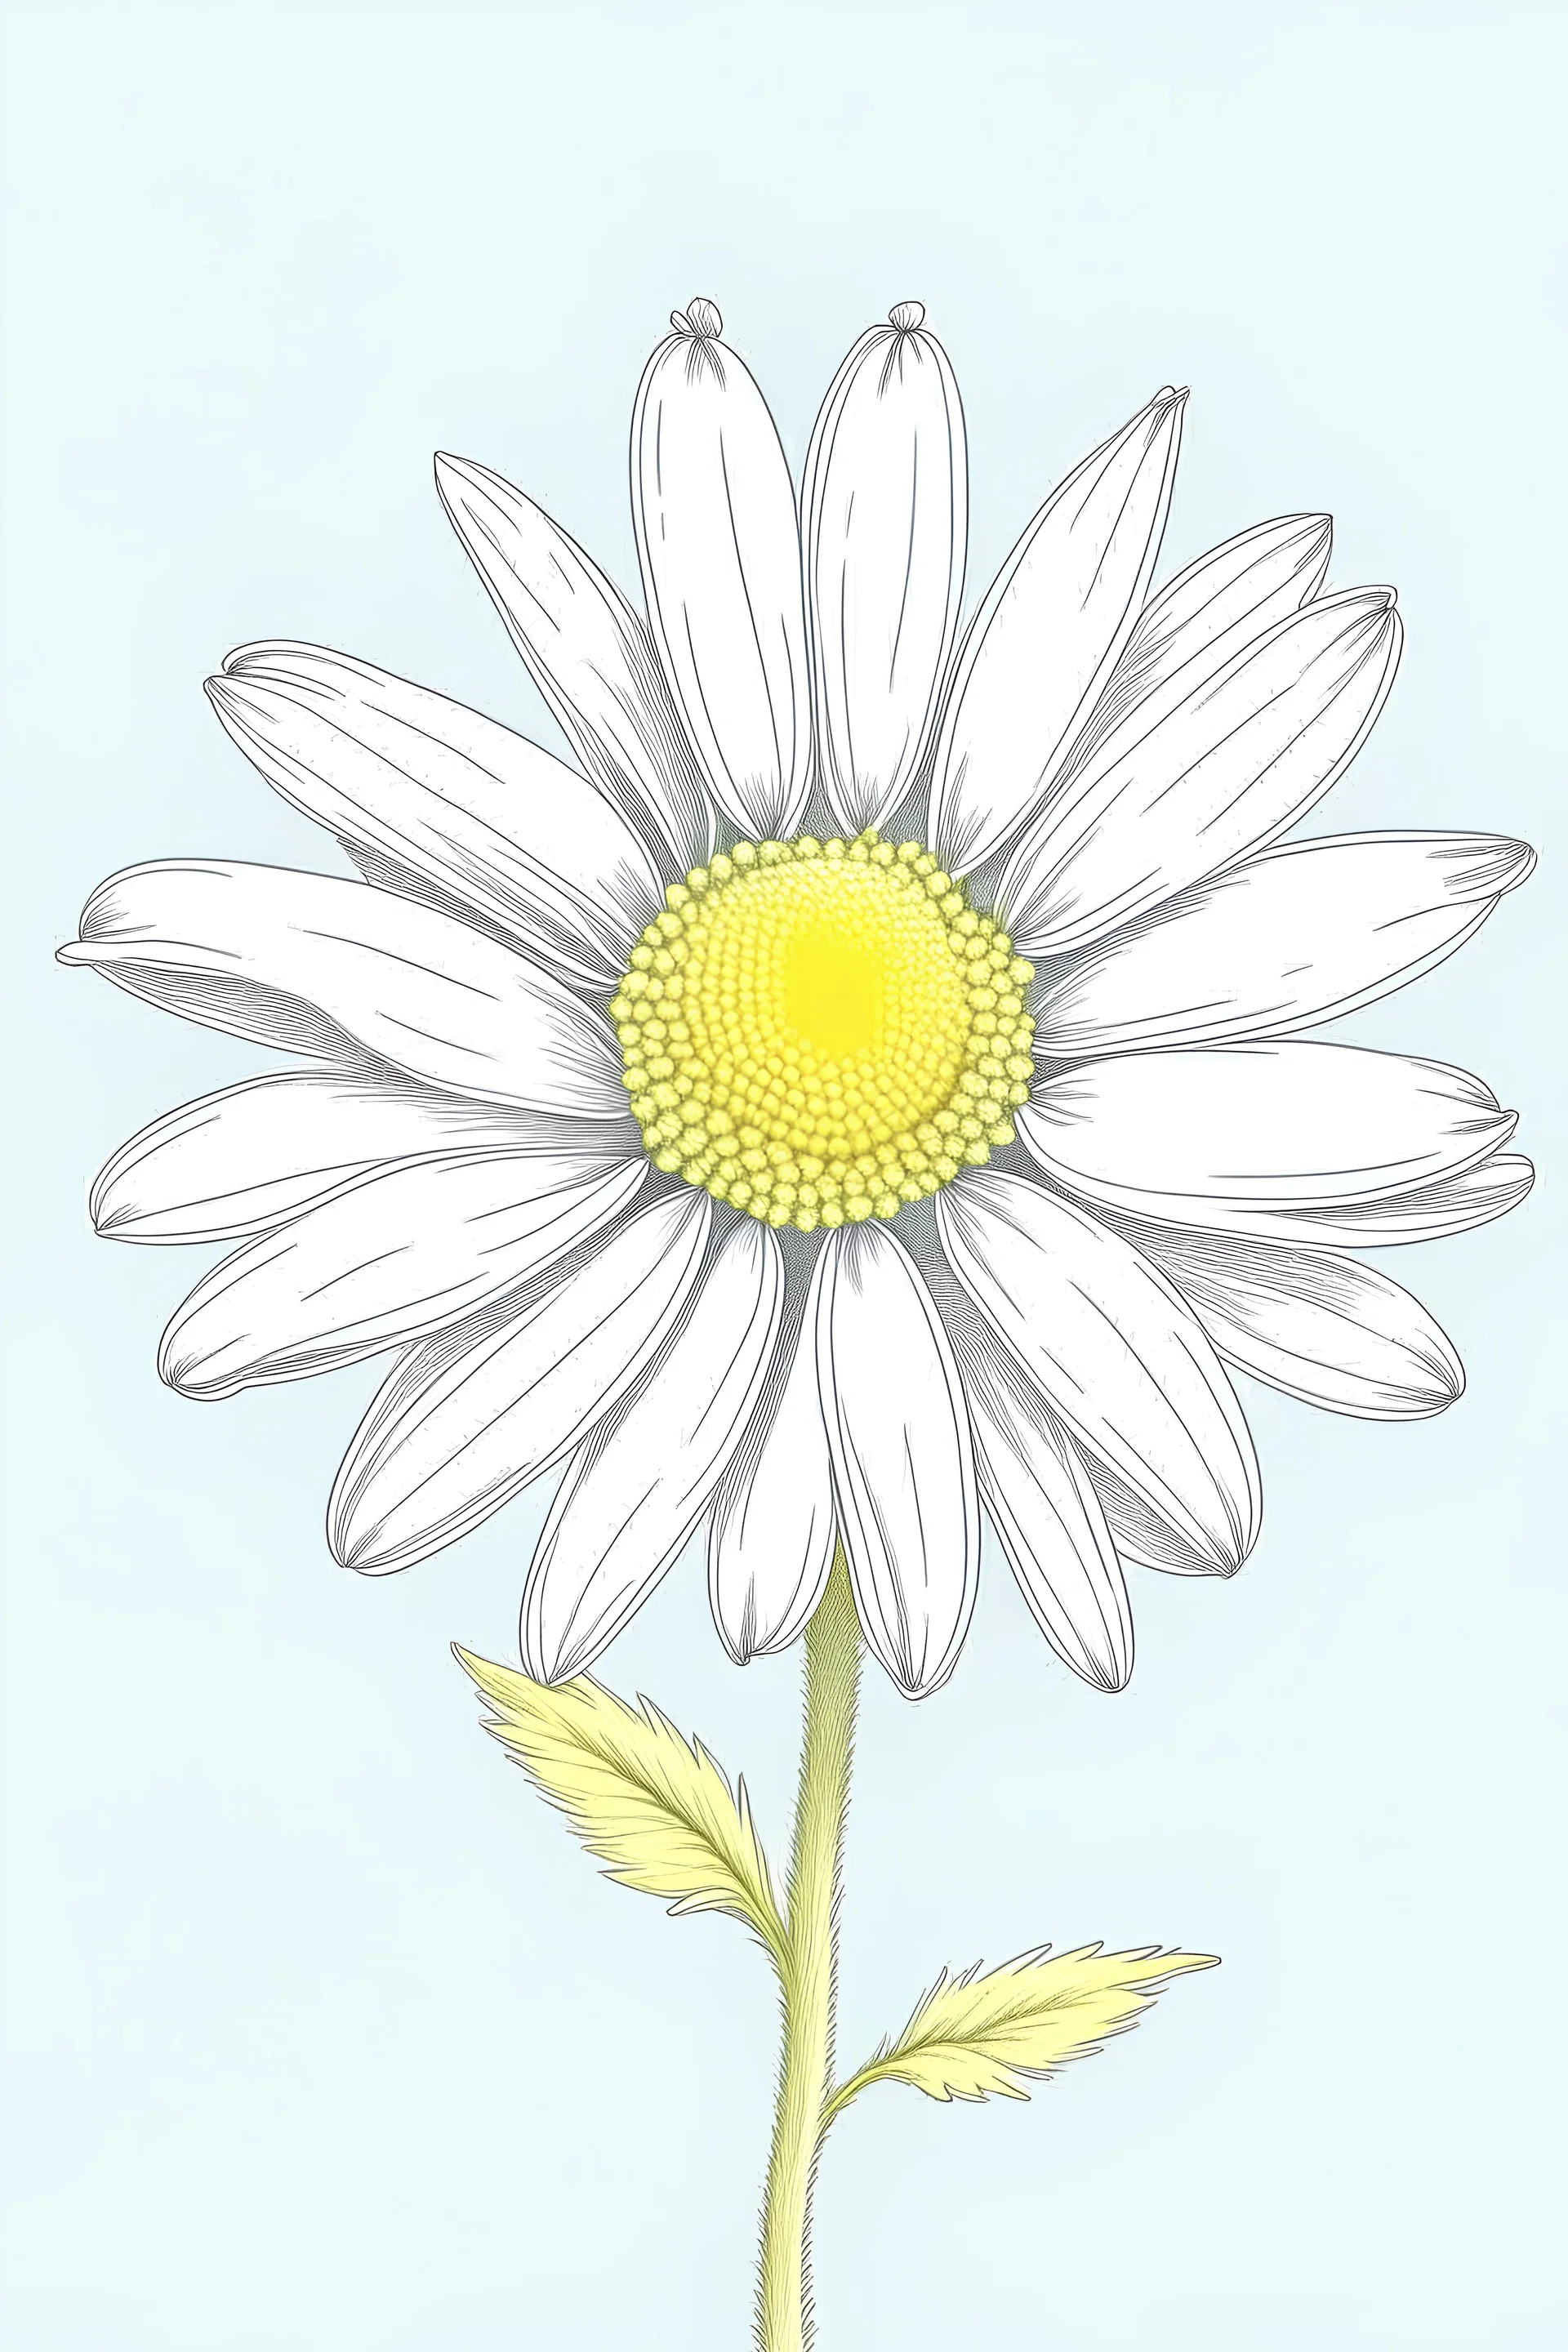 daisy flower drawing on light blue background